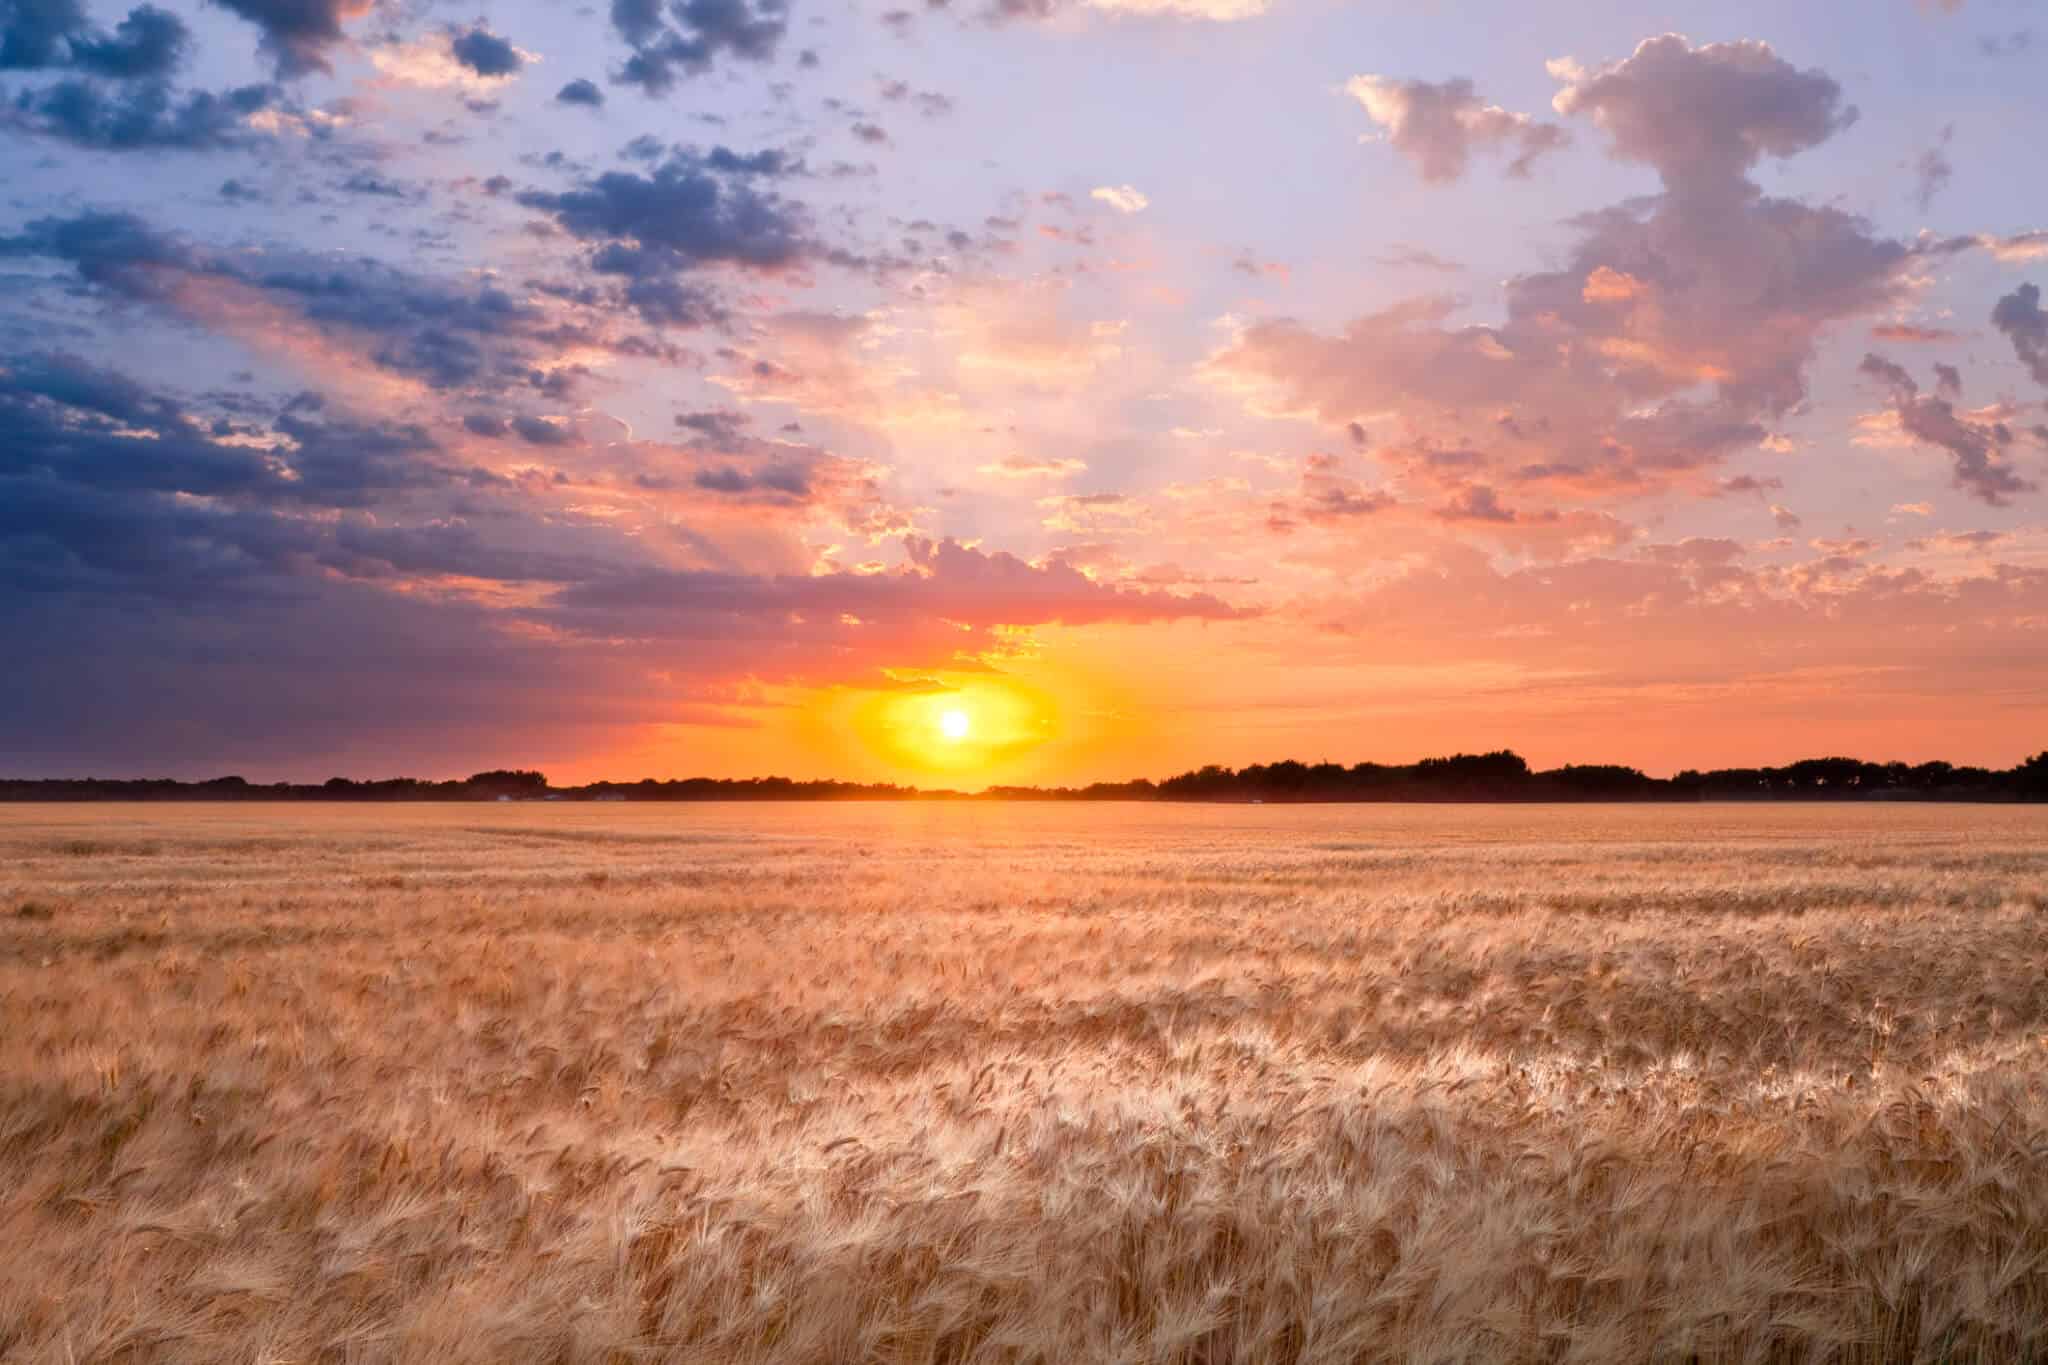 Sun setting over wheat field with colorful sky